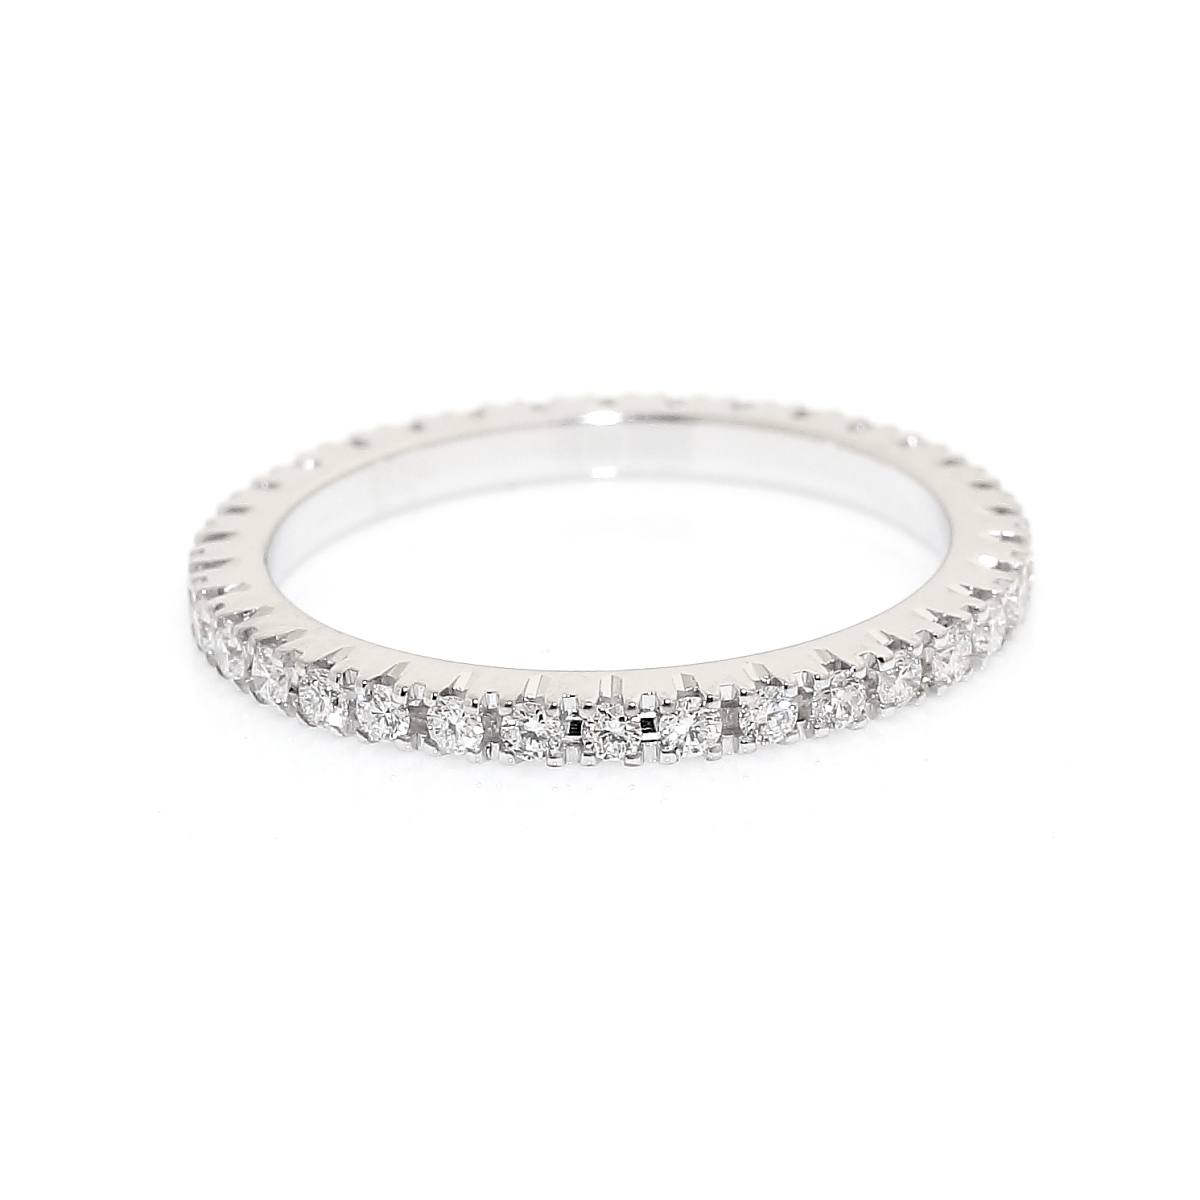 750 Mill. White Gold Ring with 0,40 Ct. Diamonds